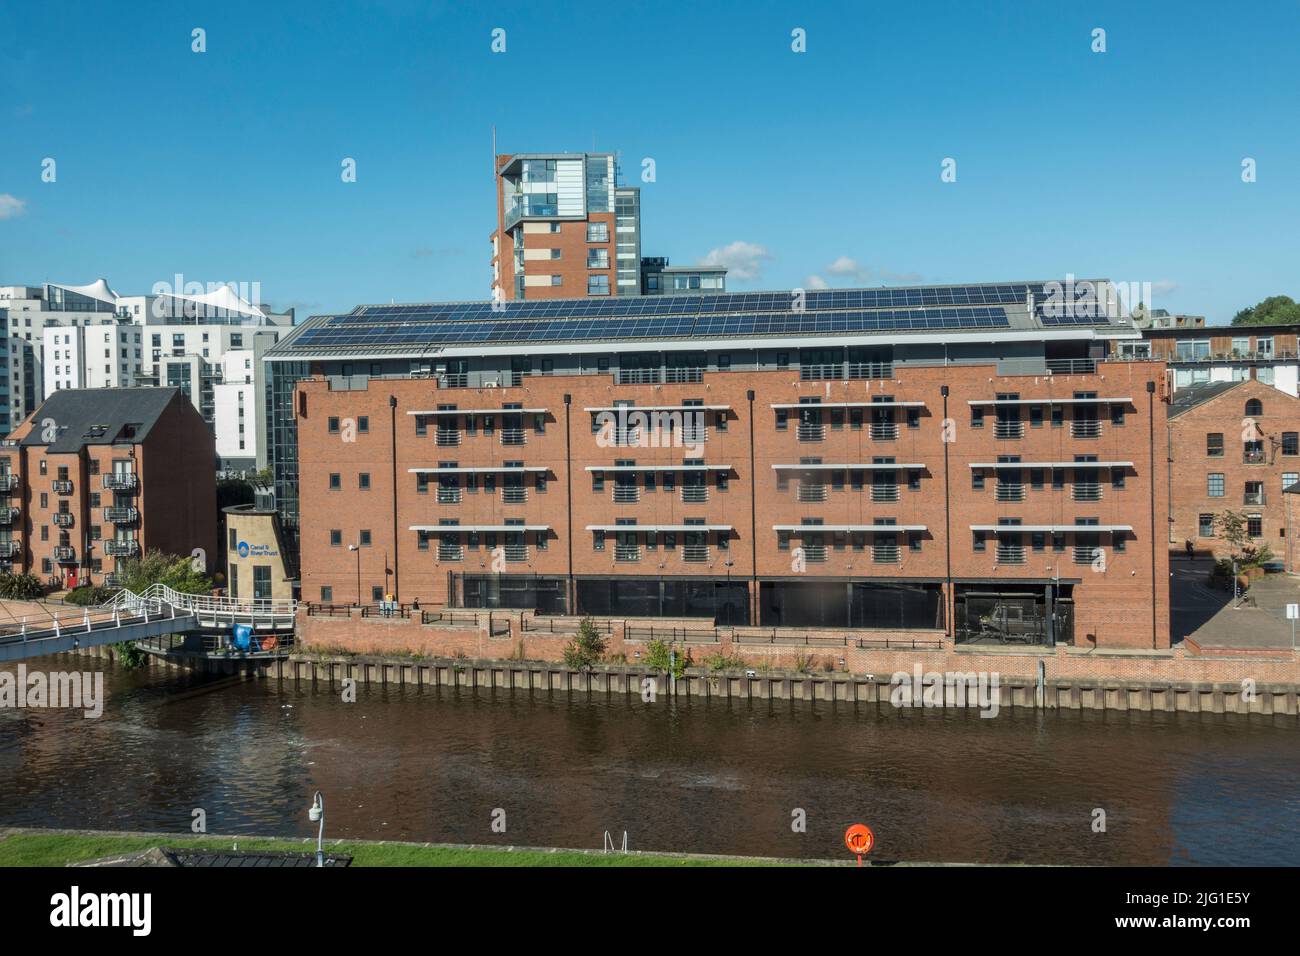 The Canal & River Trust offices in Fearns Wharf, Leeds, Yorkshire, UK. Stock Photo